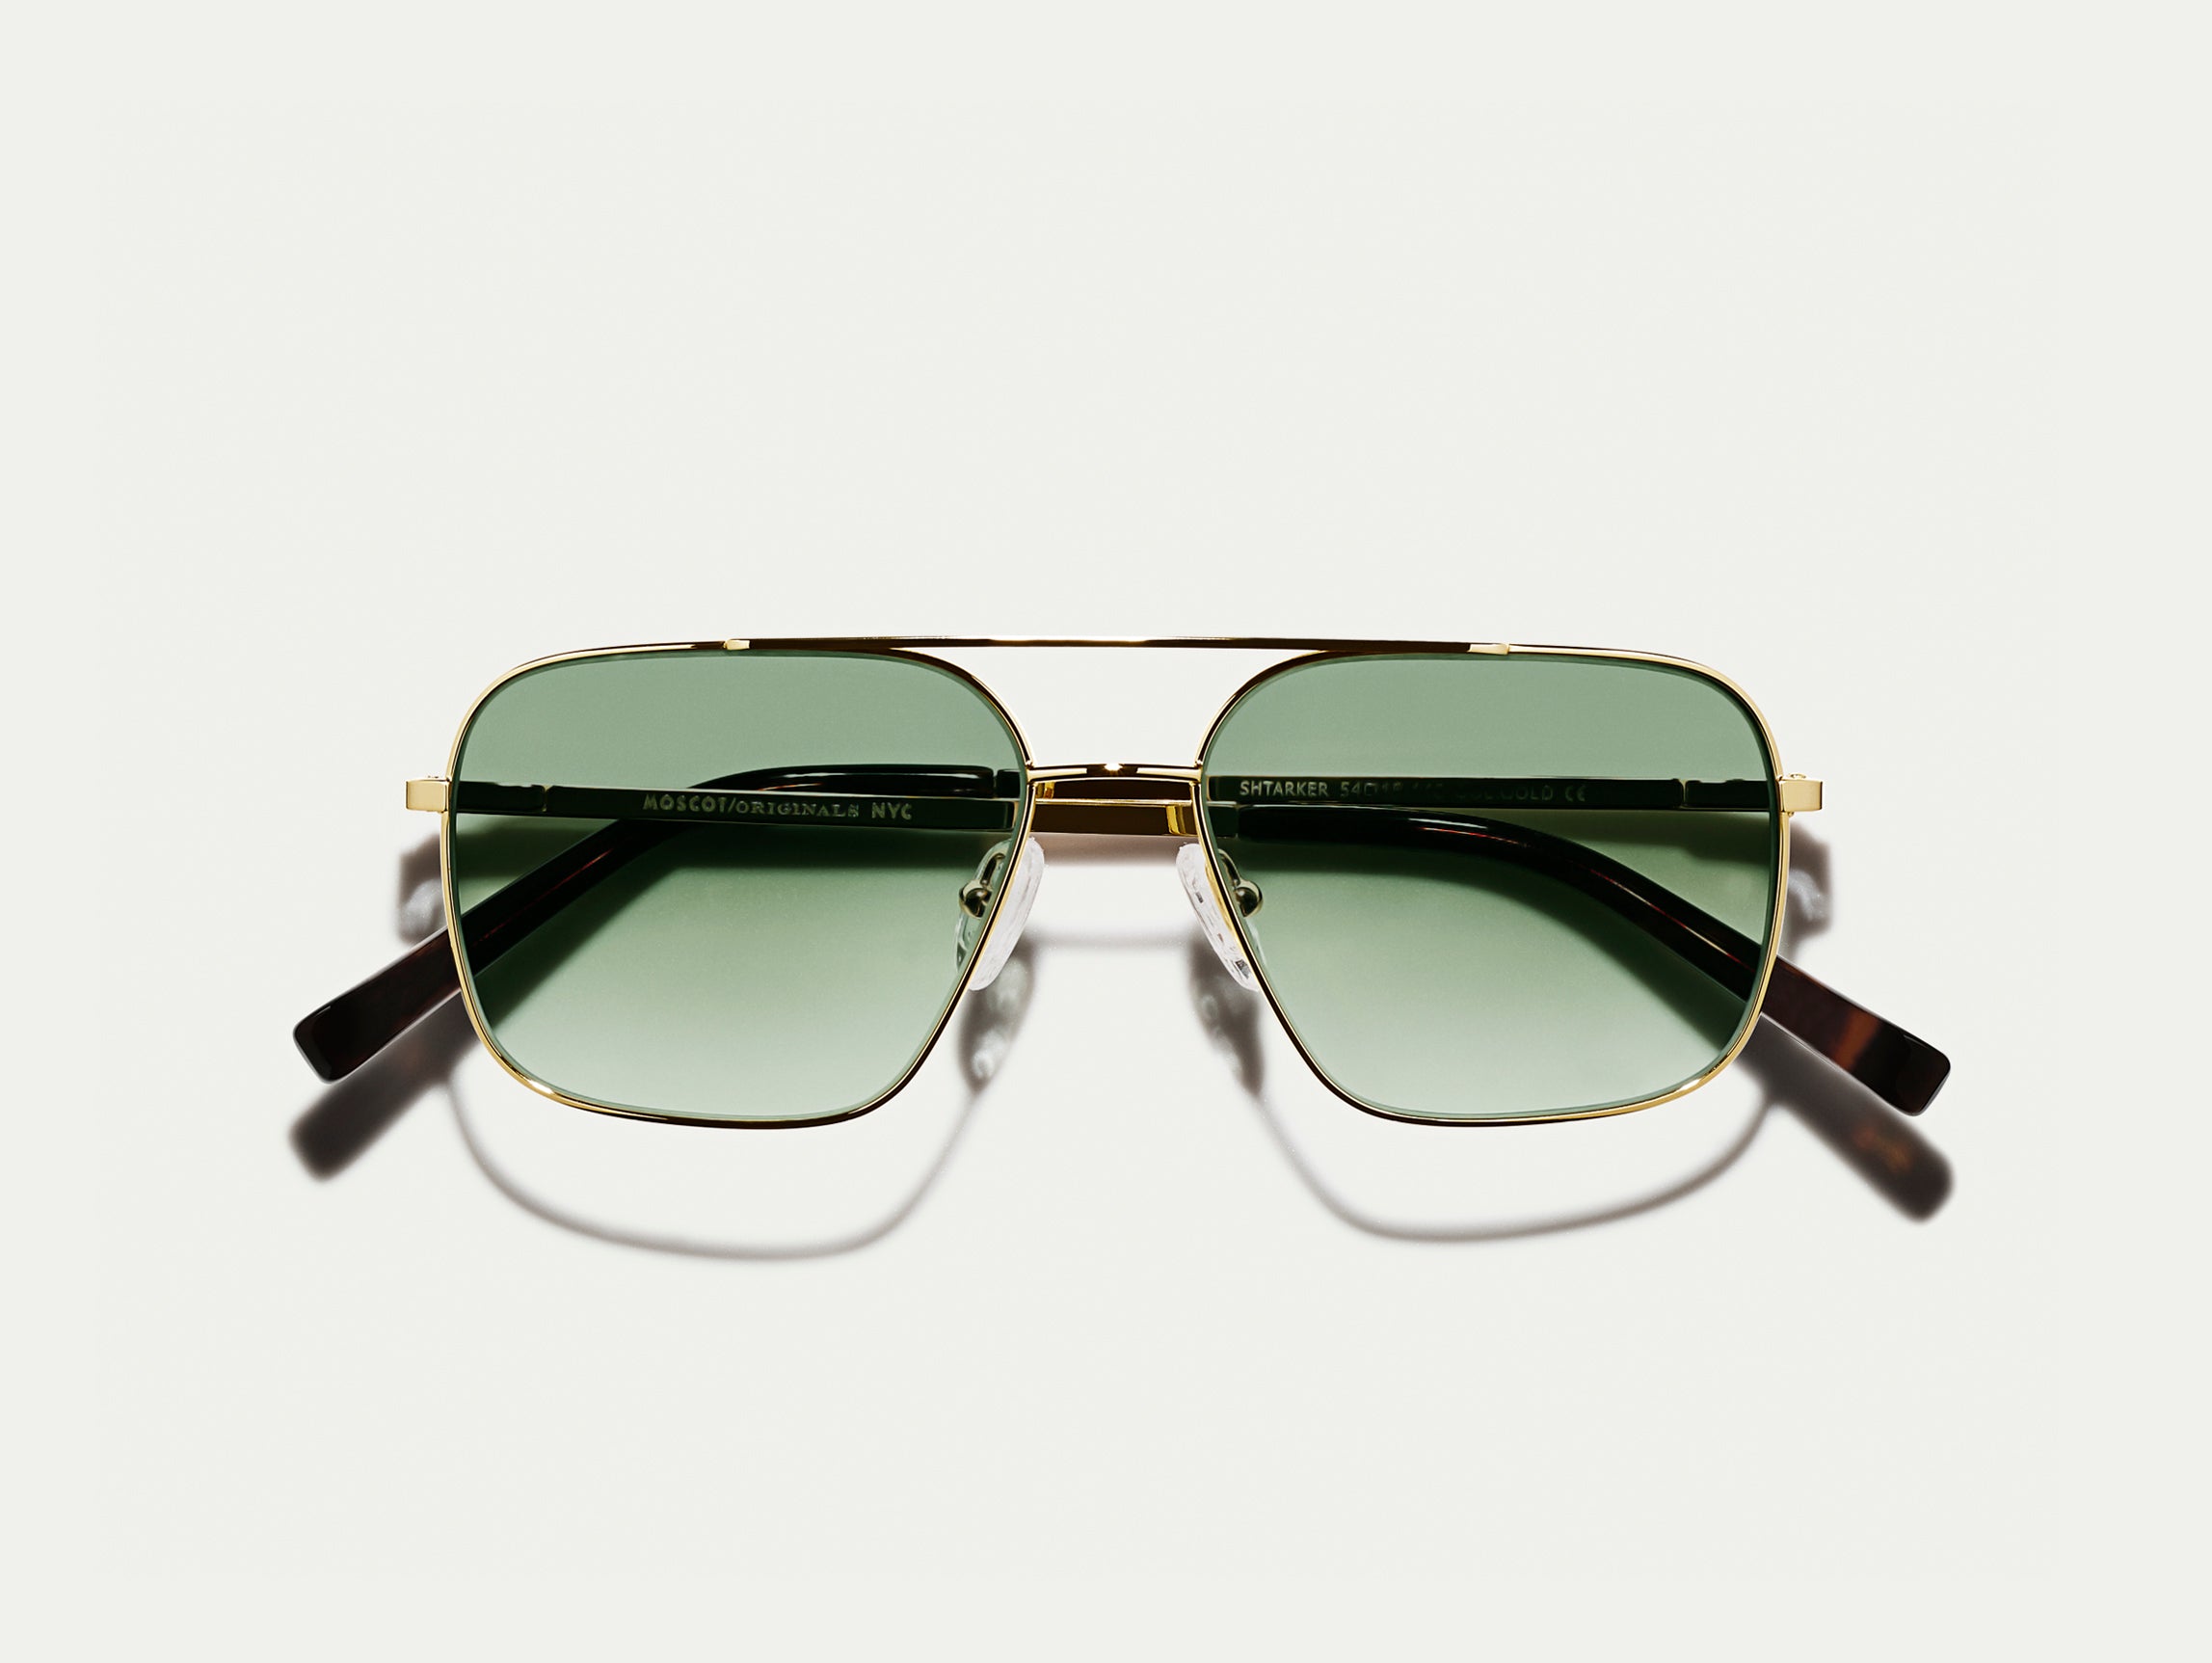 #color_g-15 fade | The SHTARKER in Gold with G-15 Fade Tinted Lenses